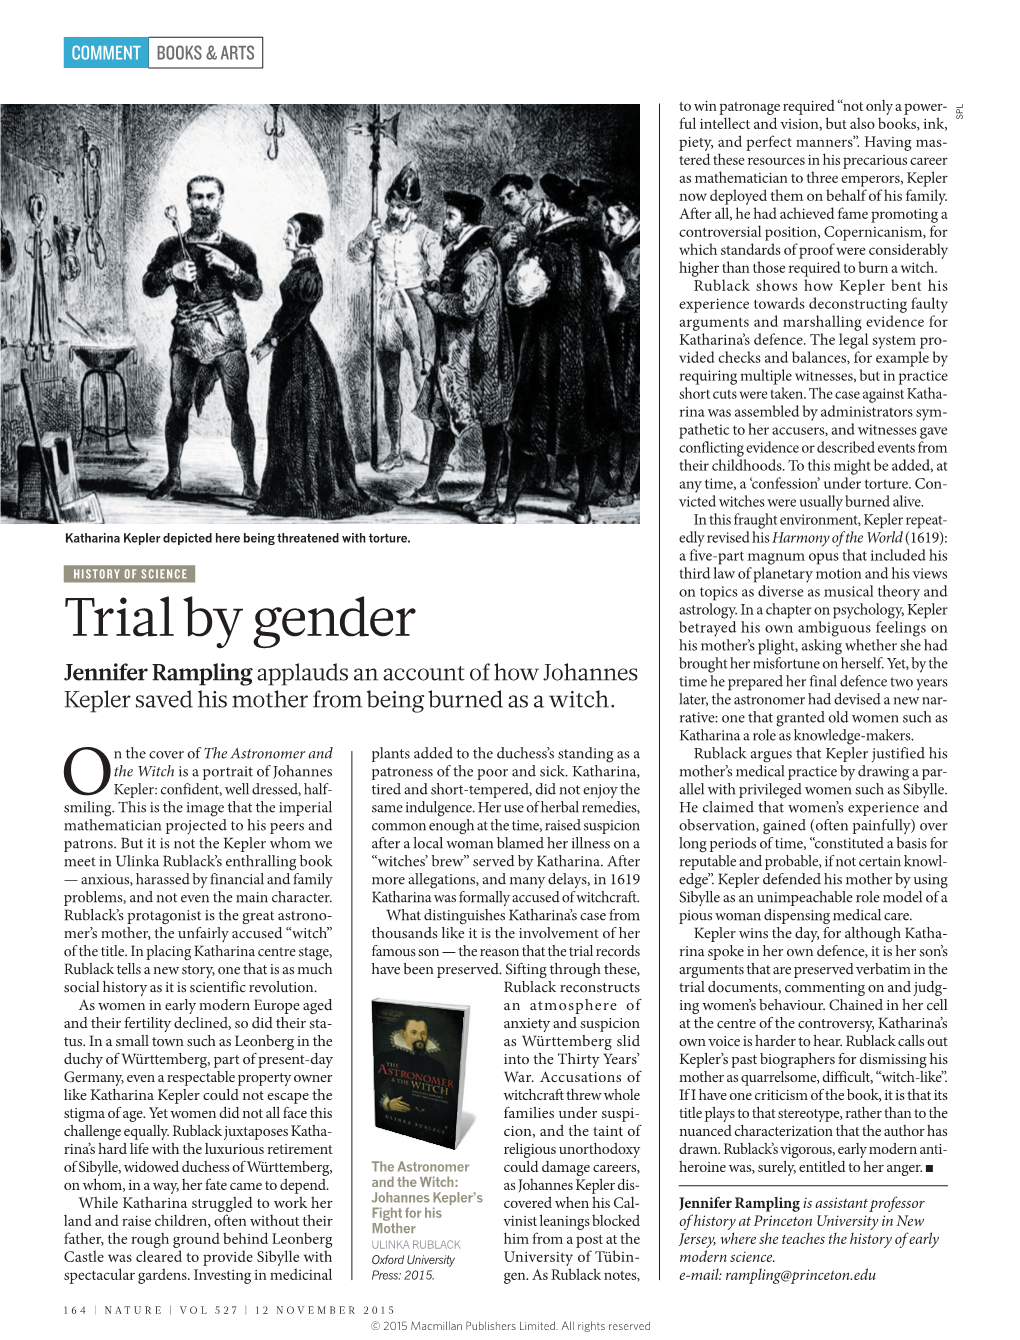 Trial by Gender His Mother’S Plight, Asking Whether She Had Brought Her Misfortune on Herself